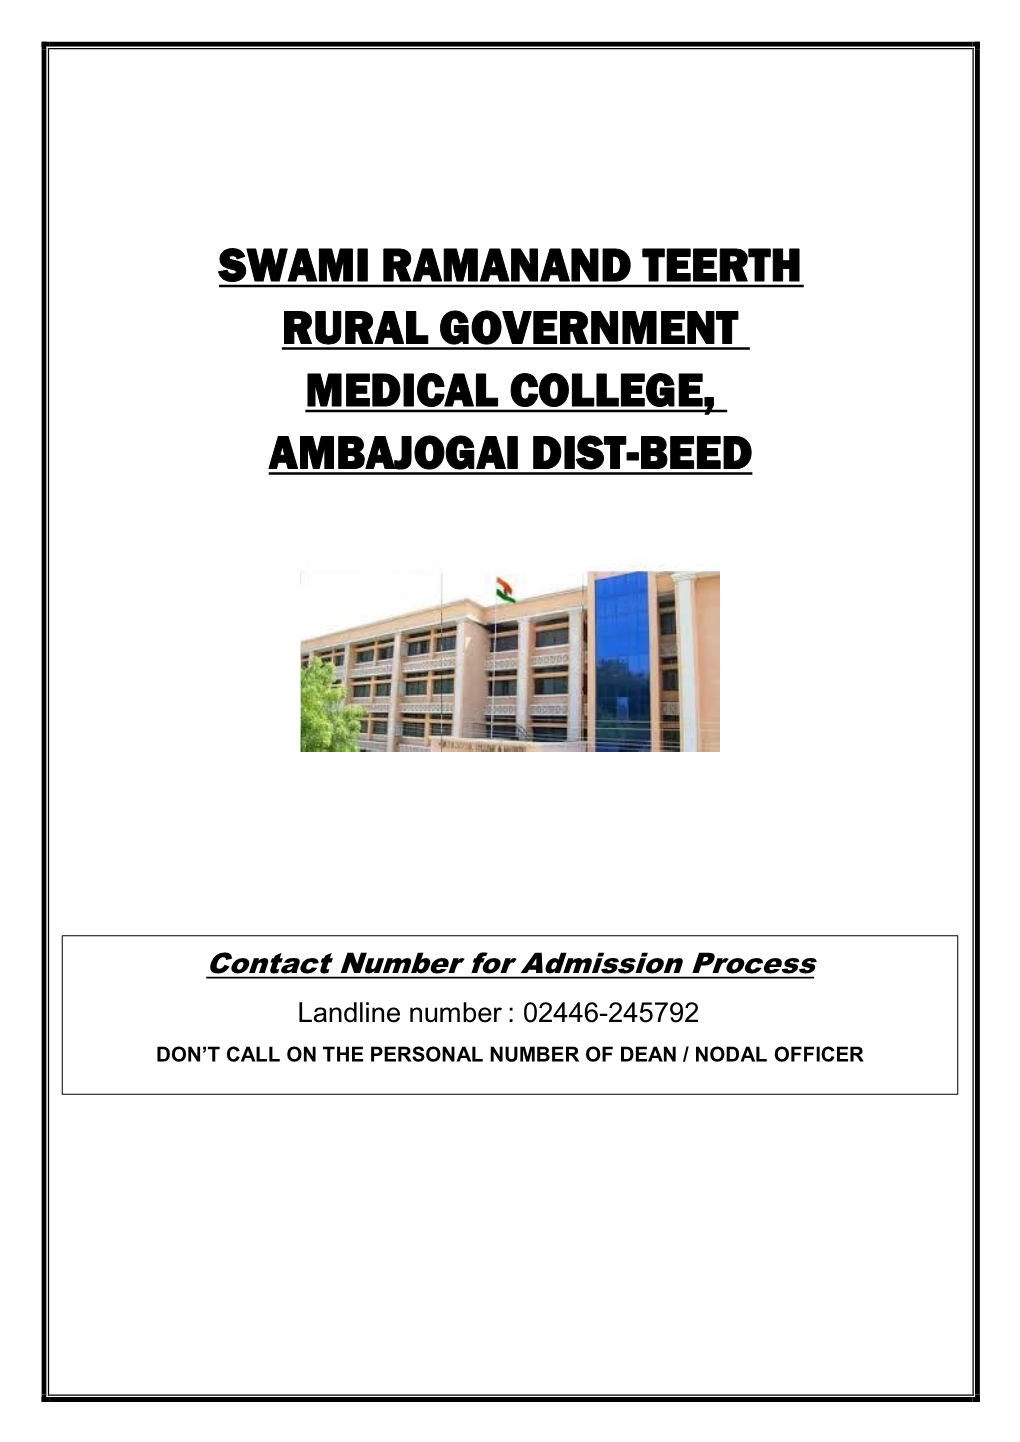 Swami Ramanand Teerth Rural Government Medical College, Ambajogai Dist-Beed